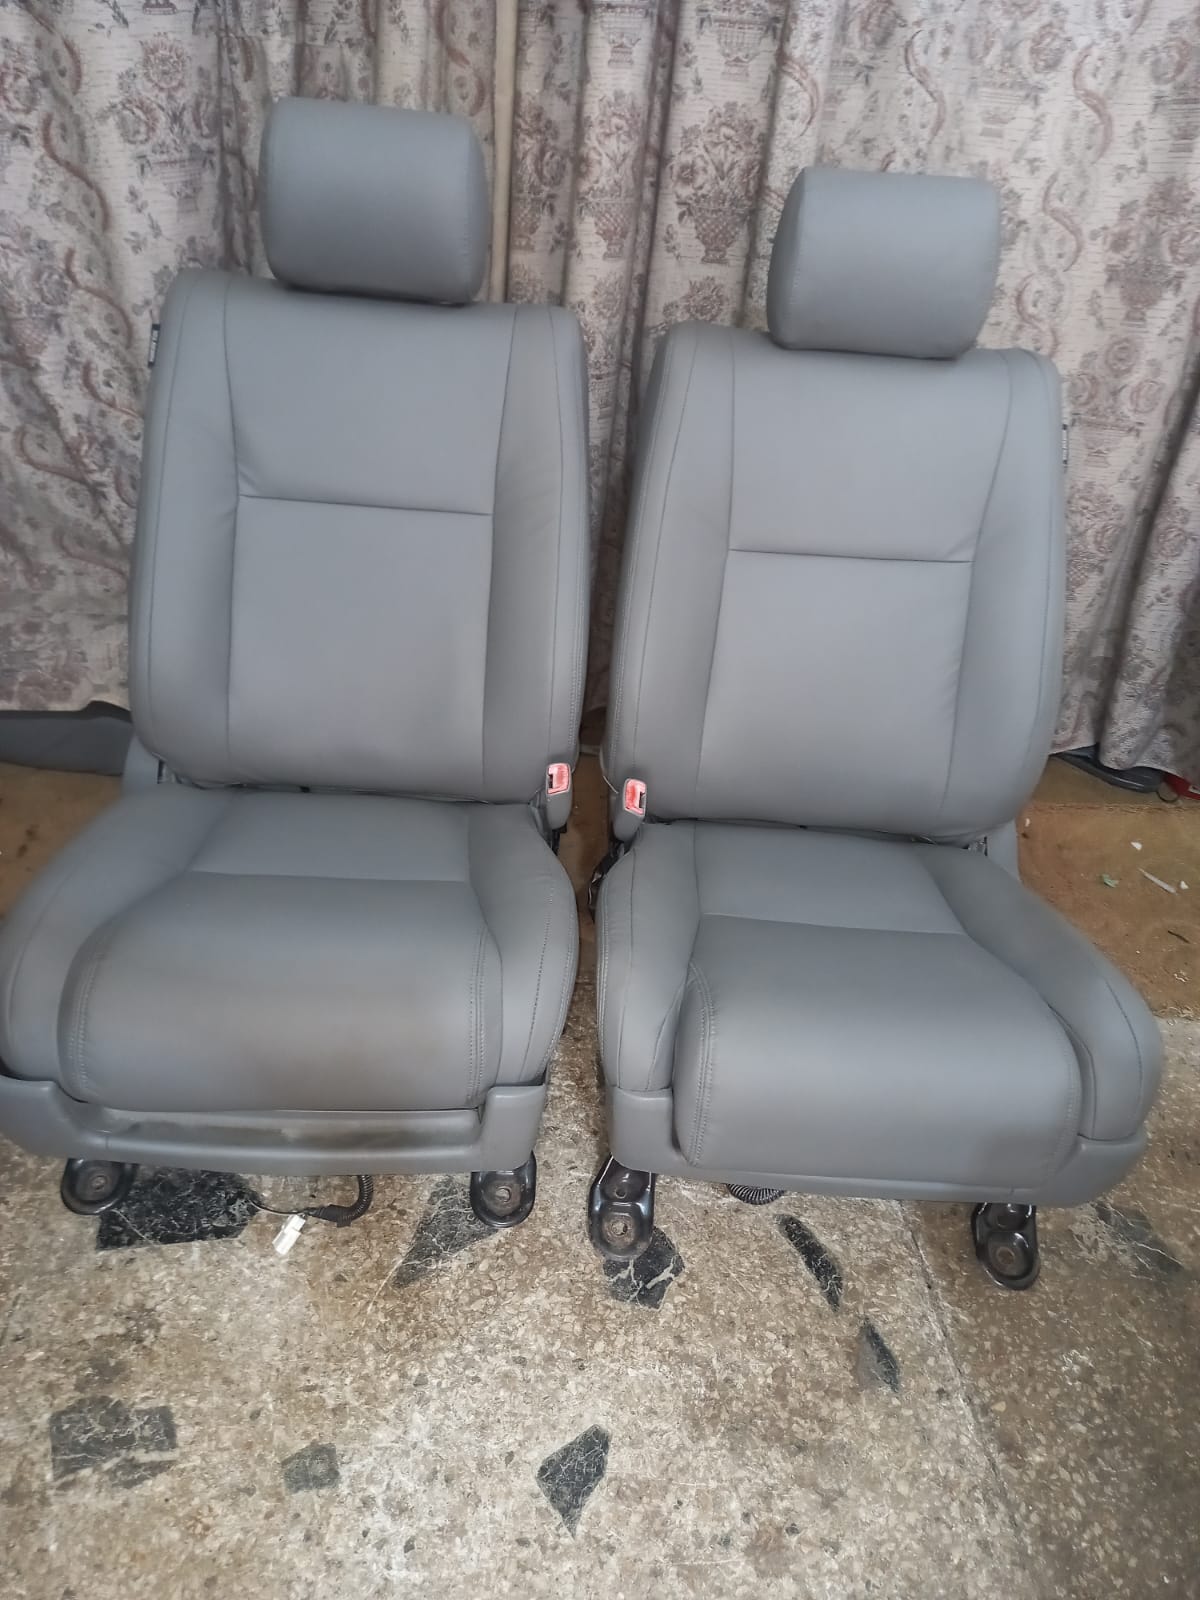 Toyota Tundra Synthetic Leather Seat Cover Gray (Year 2007 to 2013)